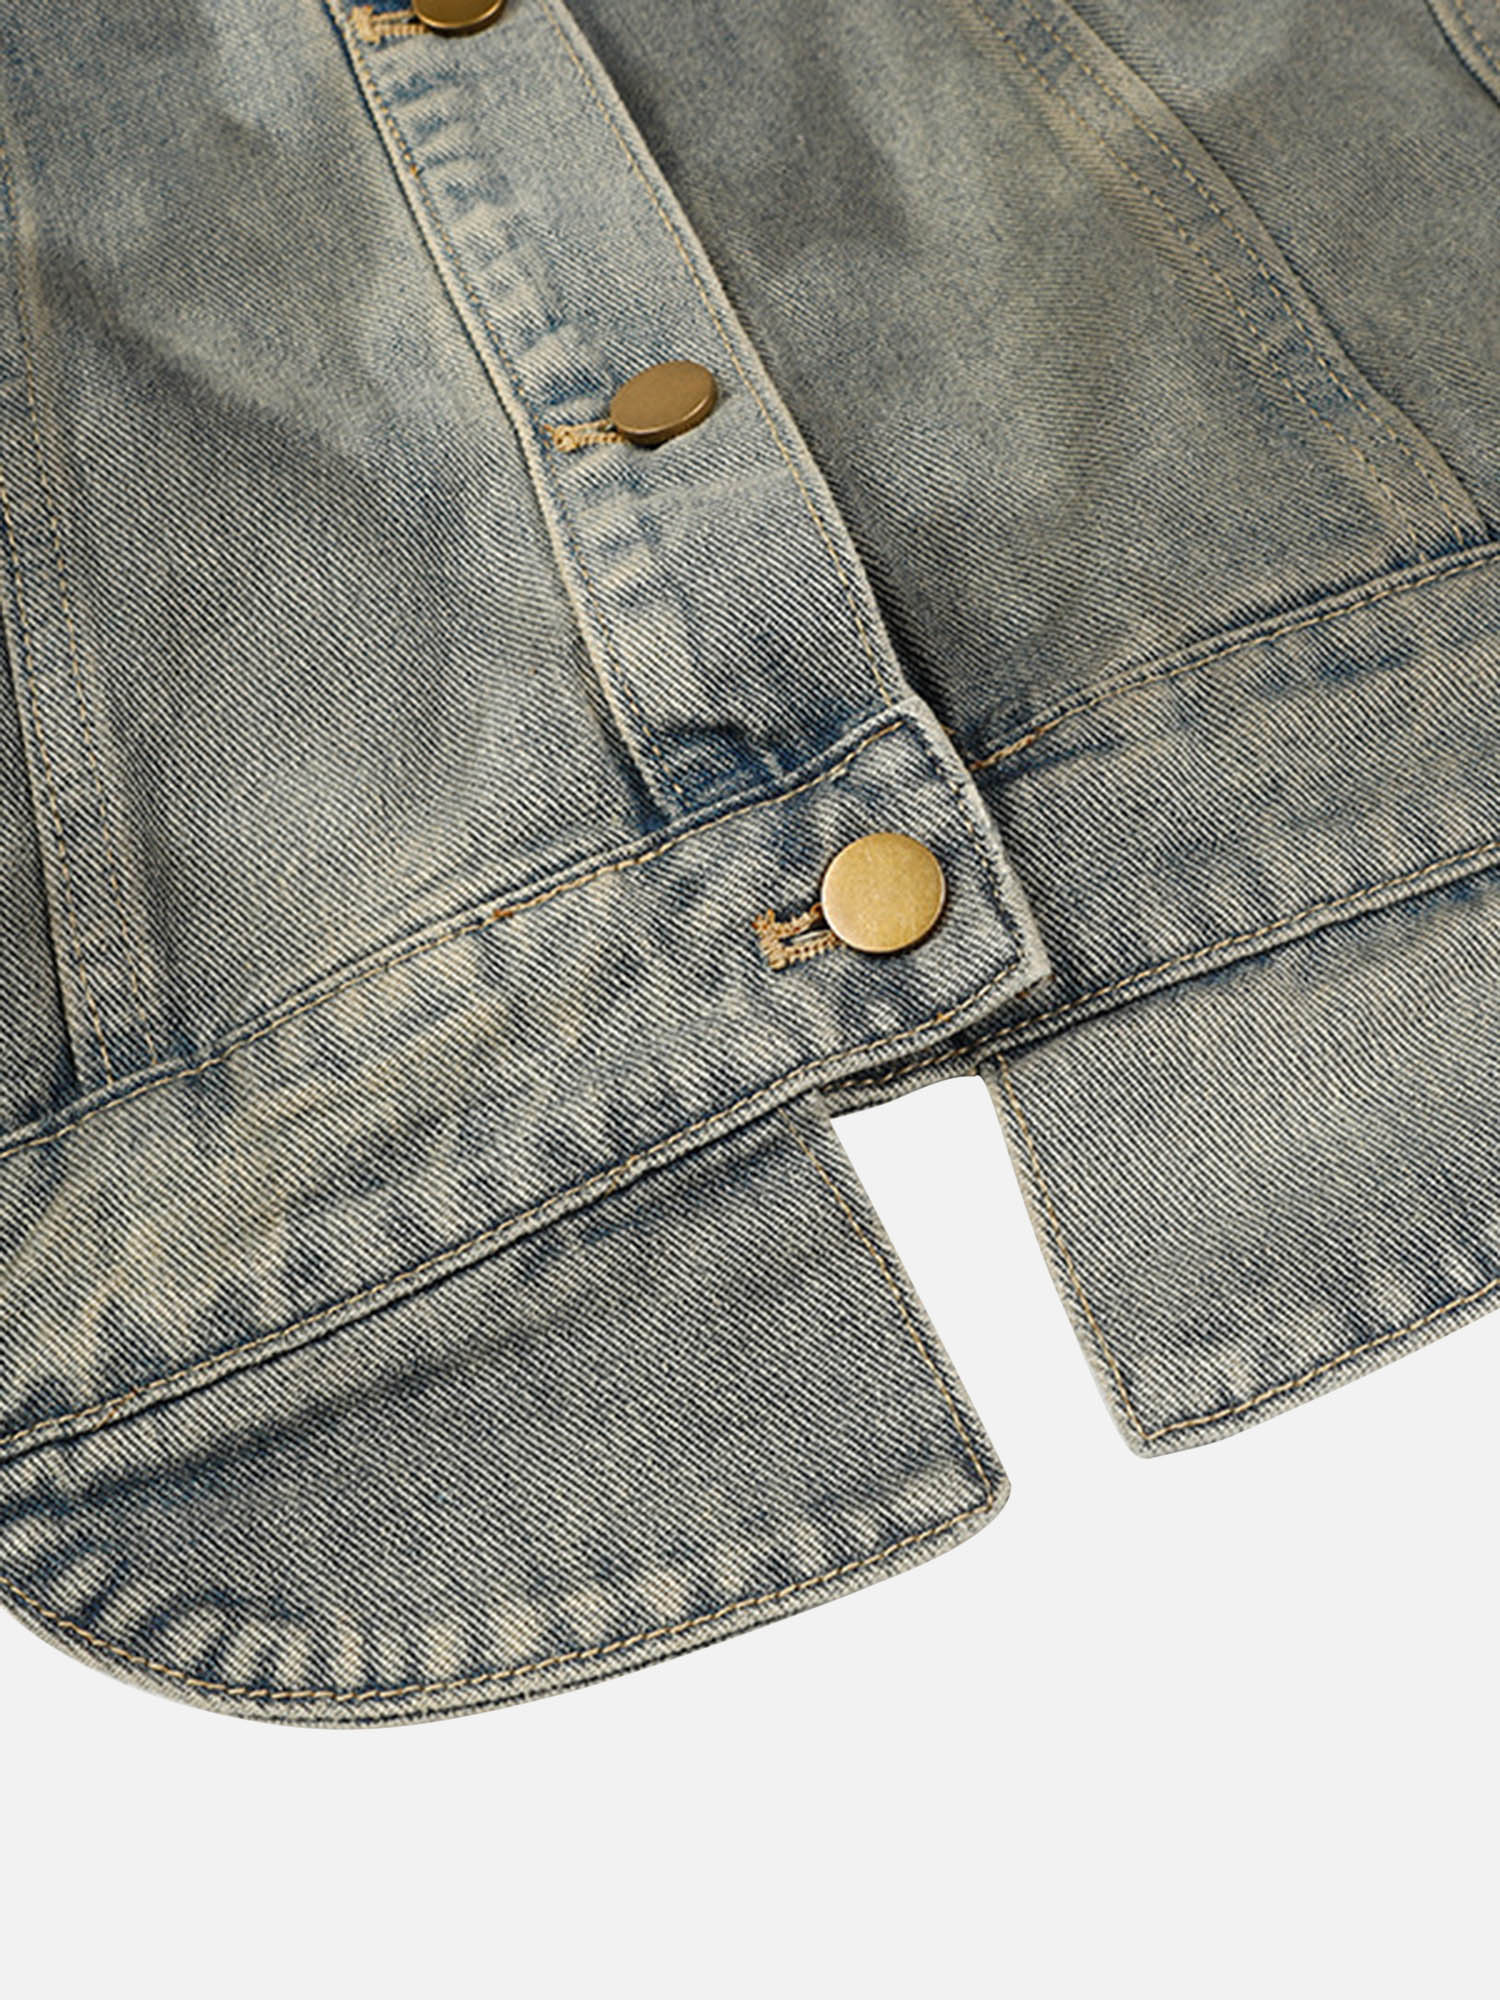 Thesupermade American Street Fashion Heavy Industry Washed Denim Jacket